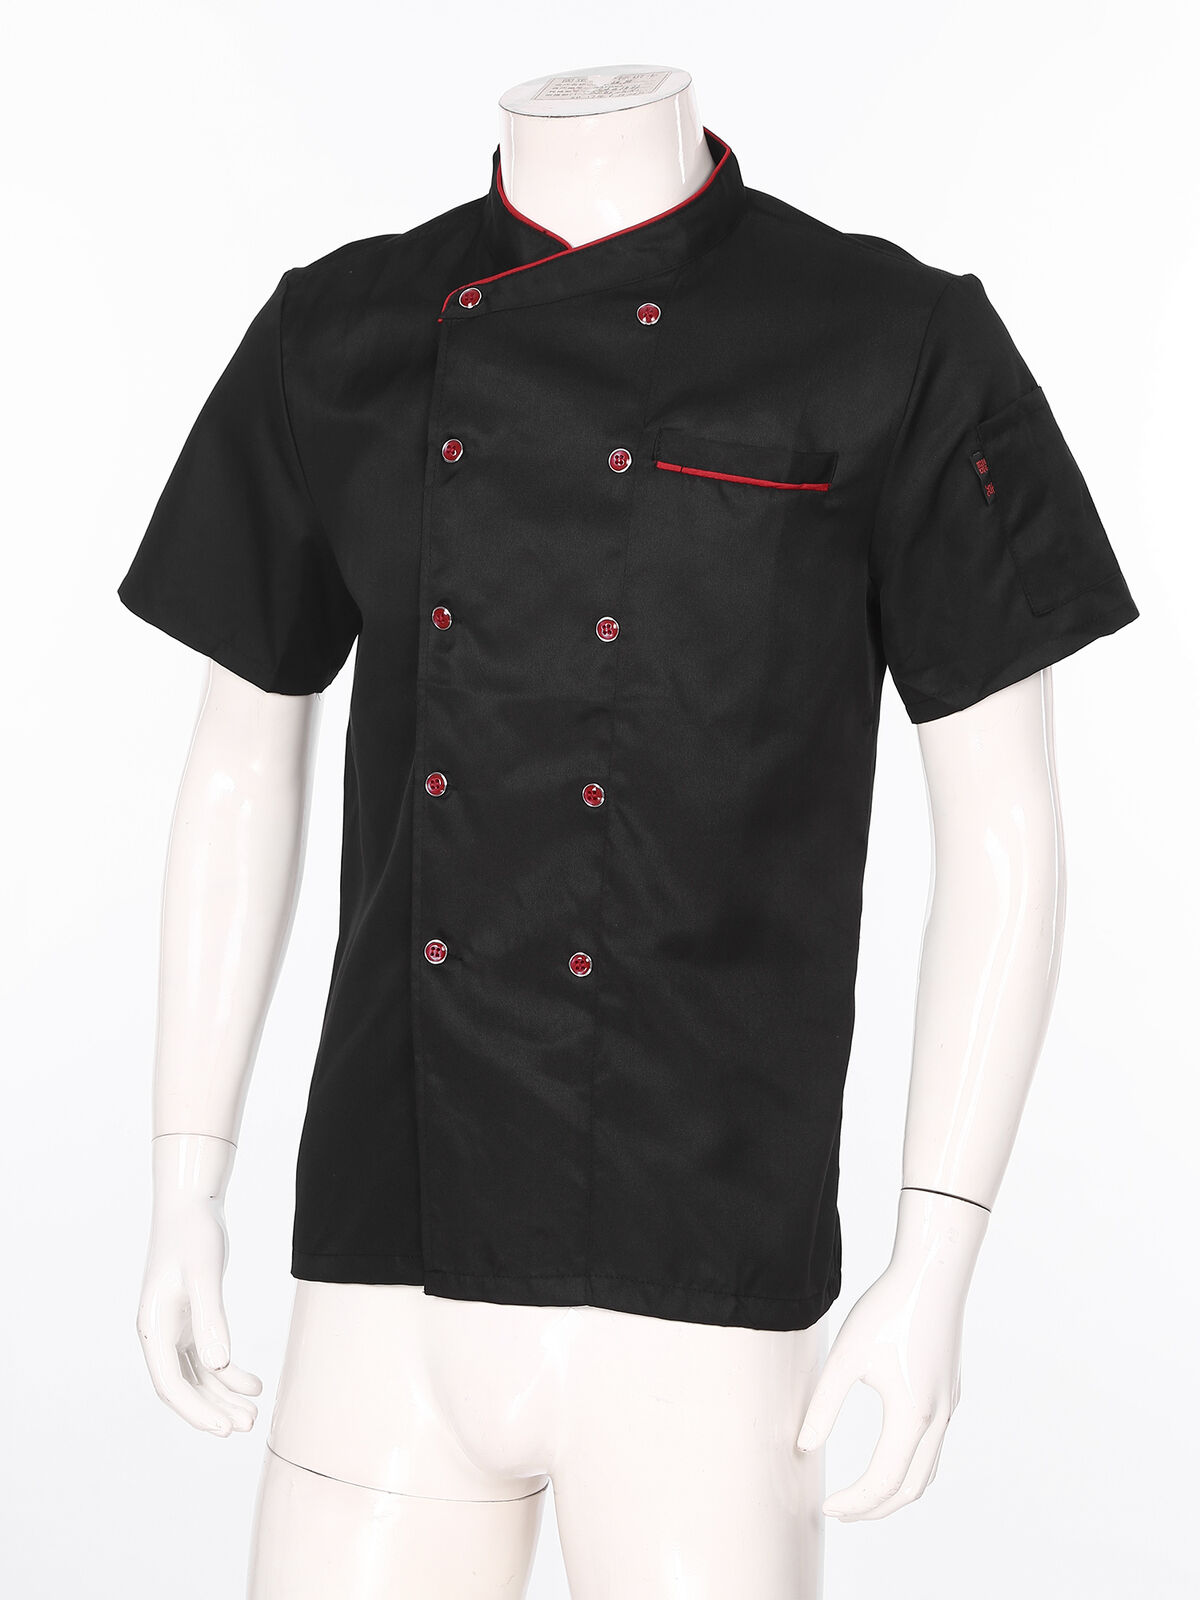 US Unisex Short Sleeve Chef Jacket with Kitchen Coat Restaurant Cooker Outfits